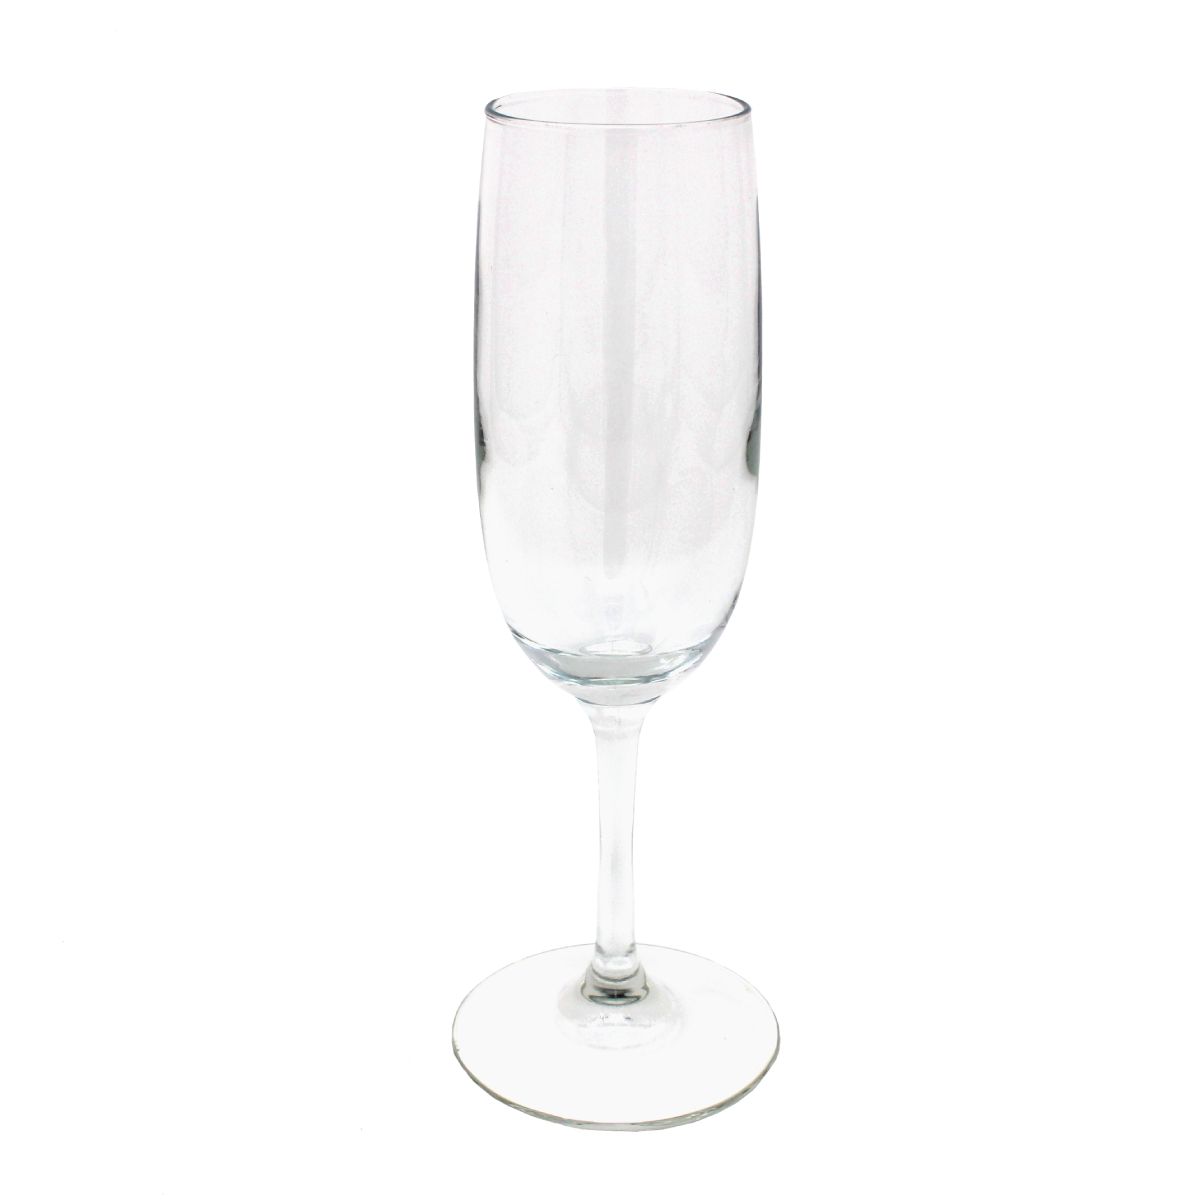 https://www.cantonchairrental.com/Resources/Images/Equipment_Guide/Flute%20Glass%206oz.jpg